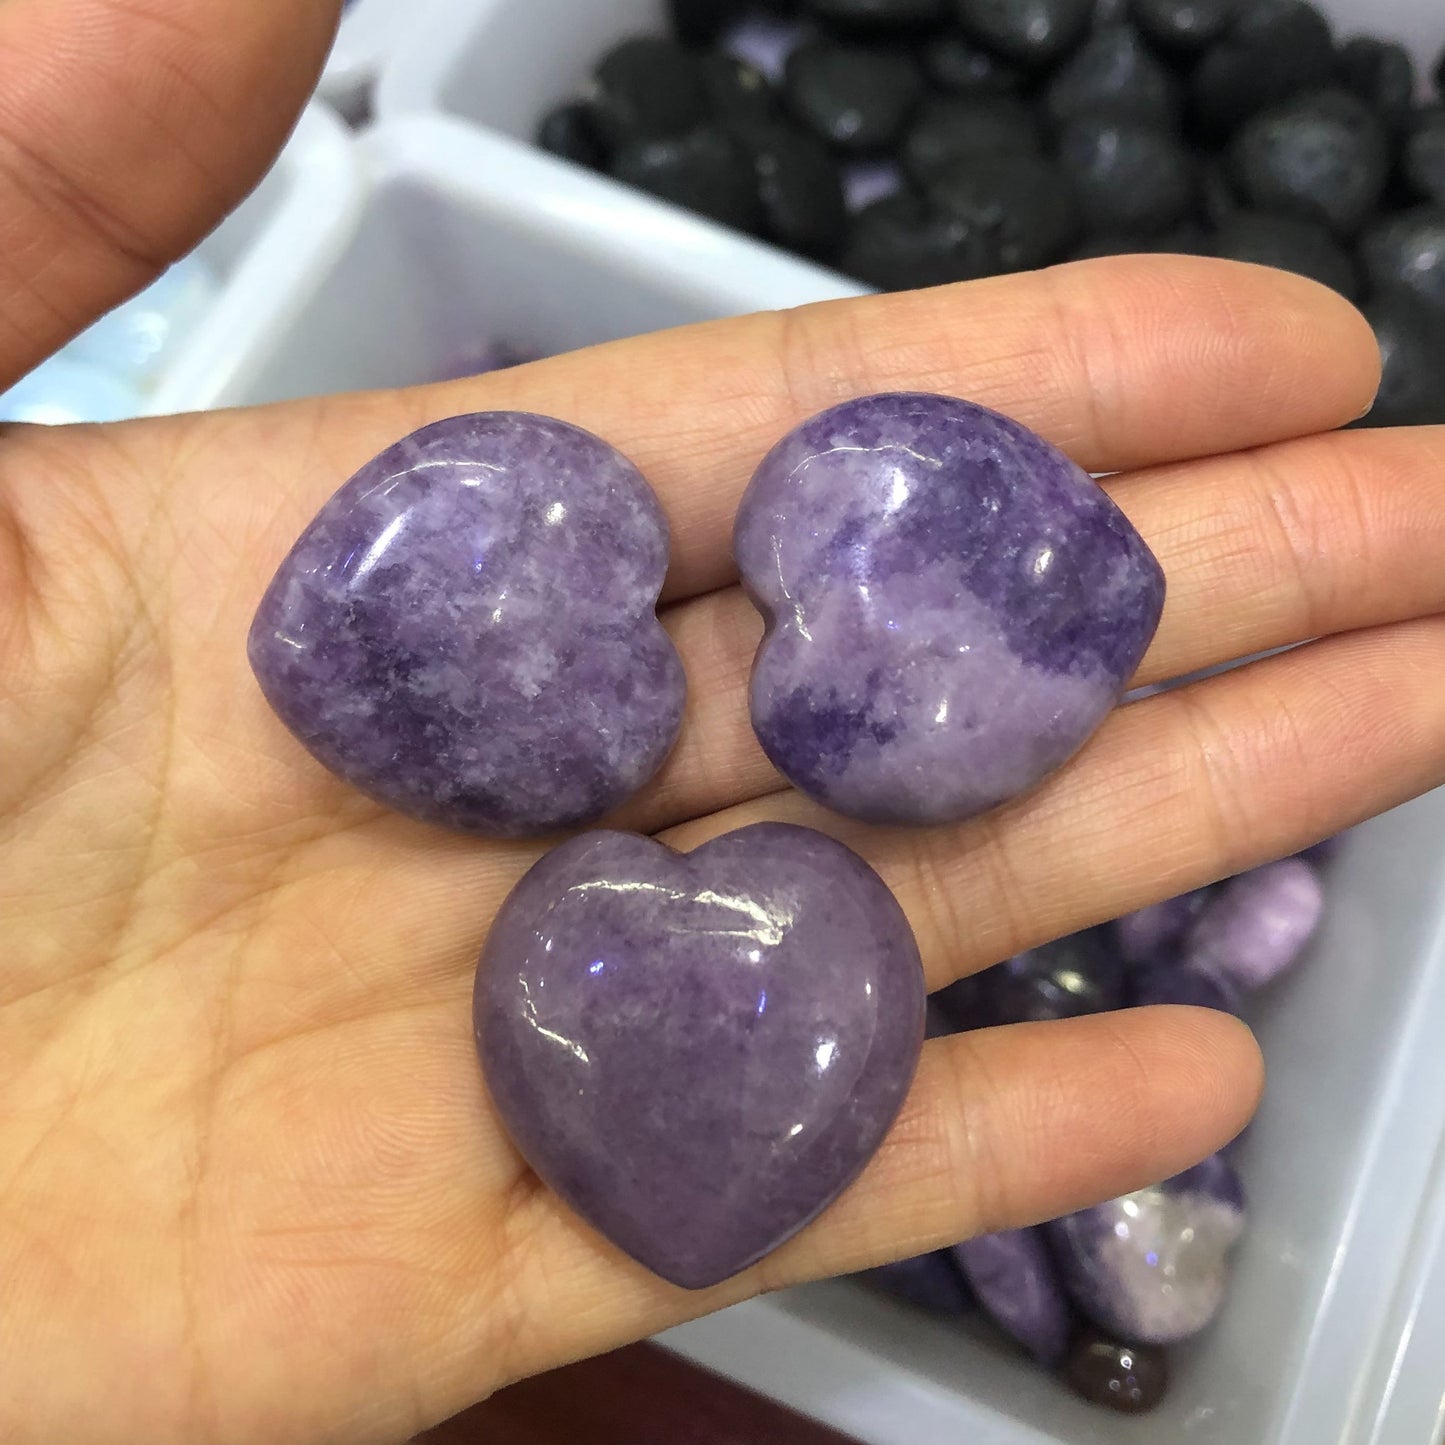 Natural Purple Mica Heart Crystal Stones for Home Decoration and Chakra Healing - Set of 10